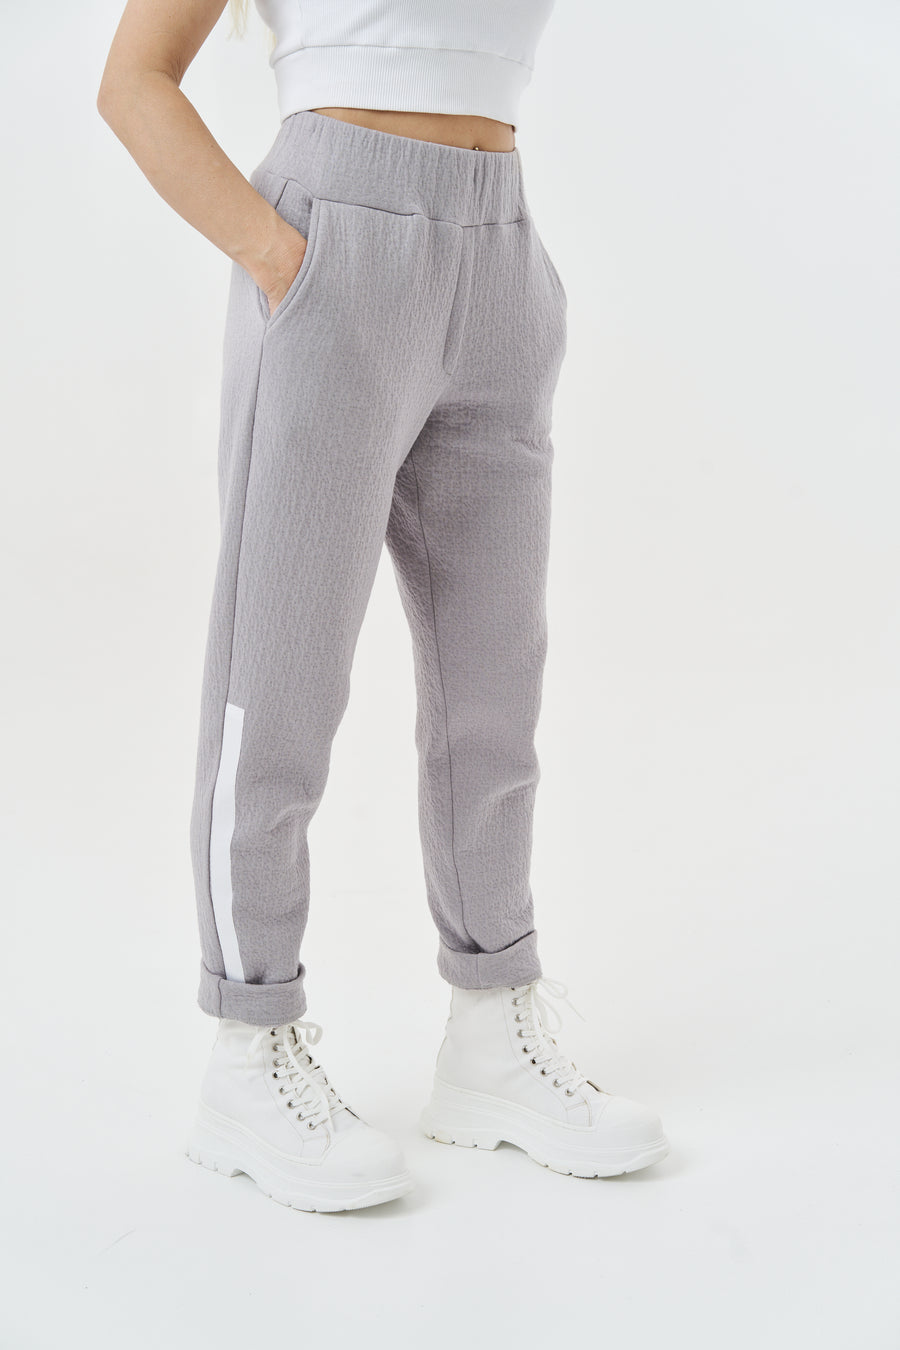 TROUSERS BY SHANTI COLLINS